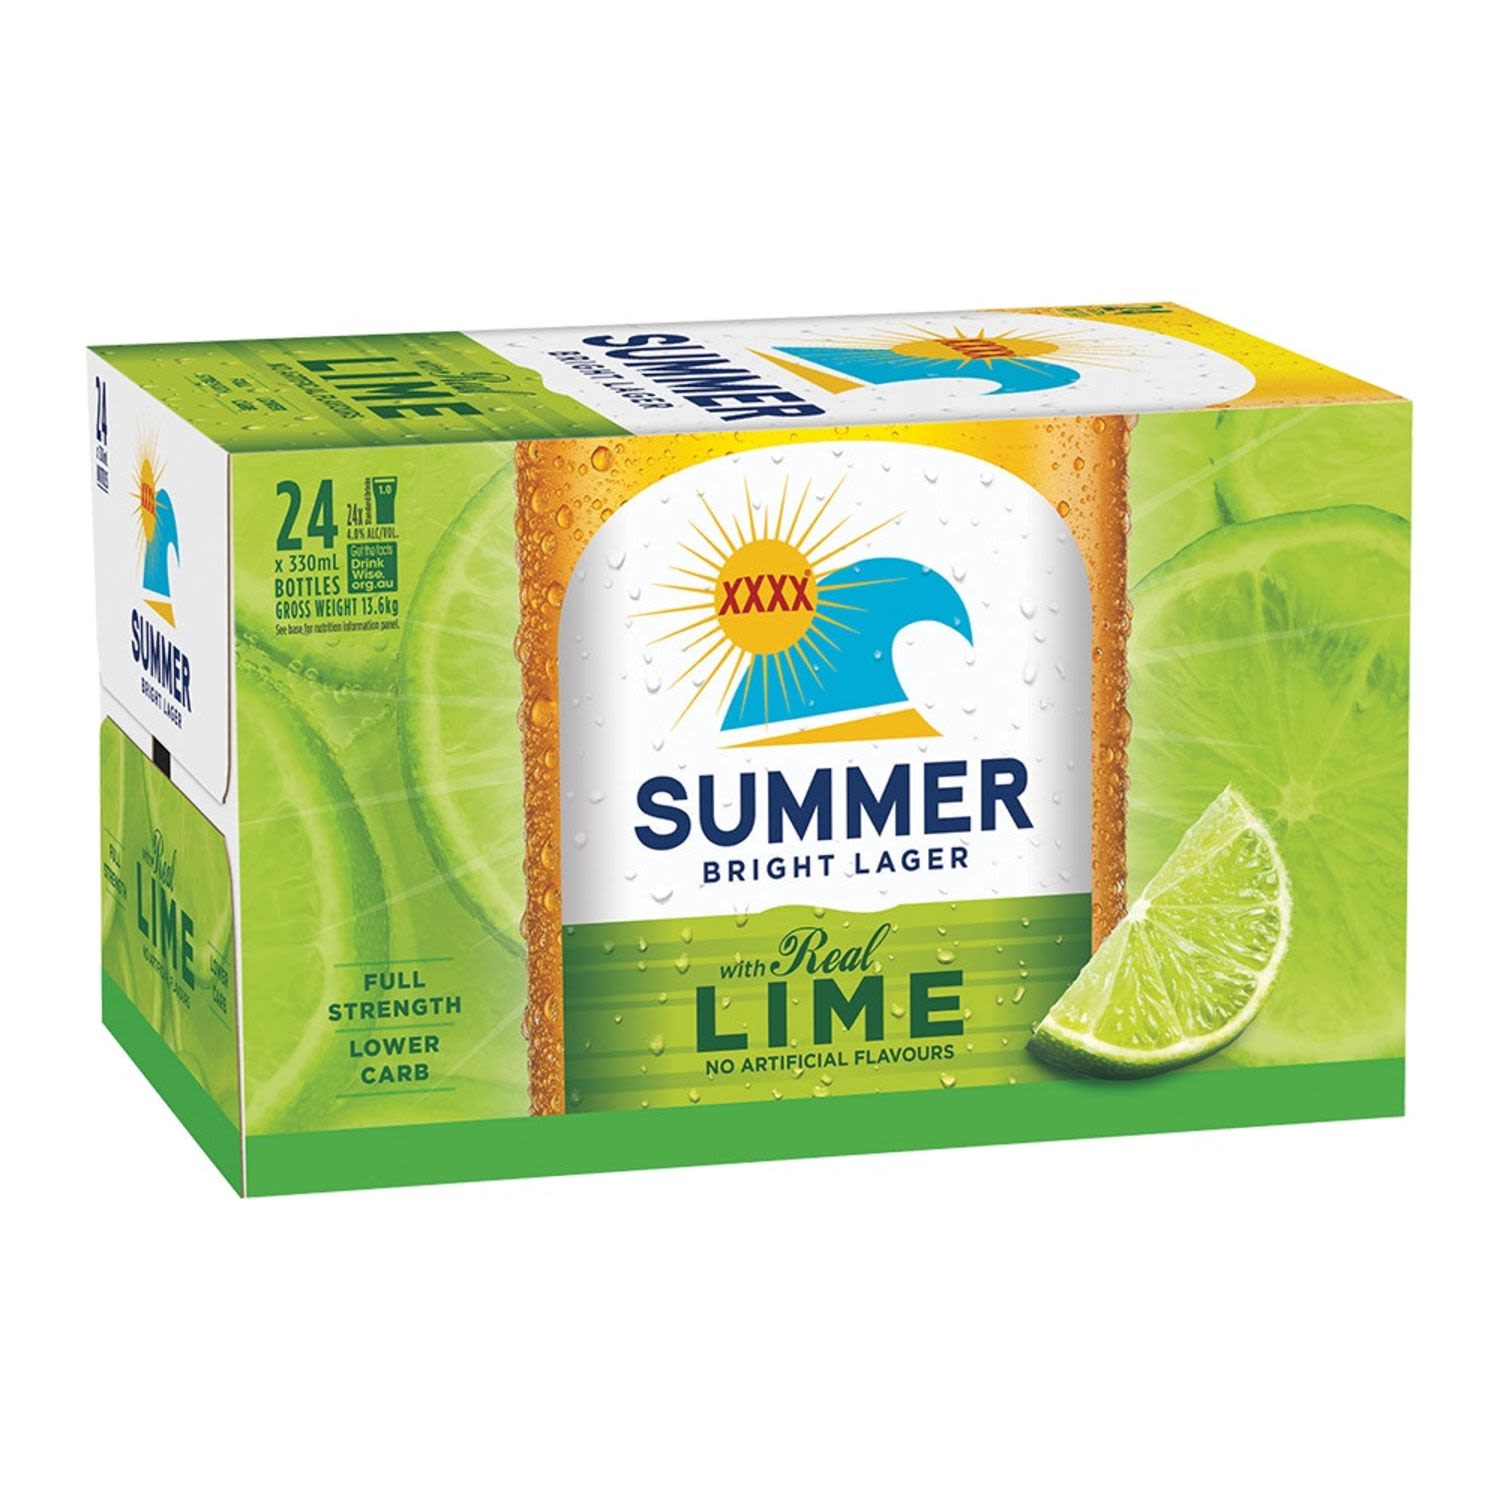 XXXX Summer Bright Lager with Natural Lime Bottle 330mL 24 Pack